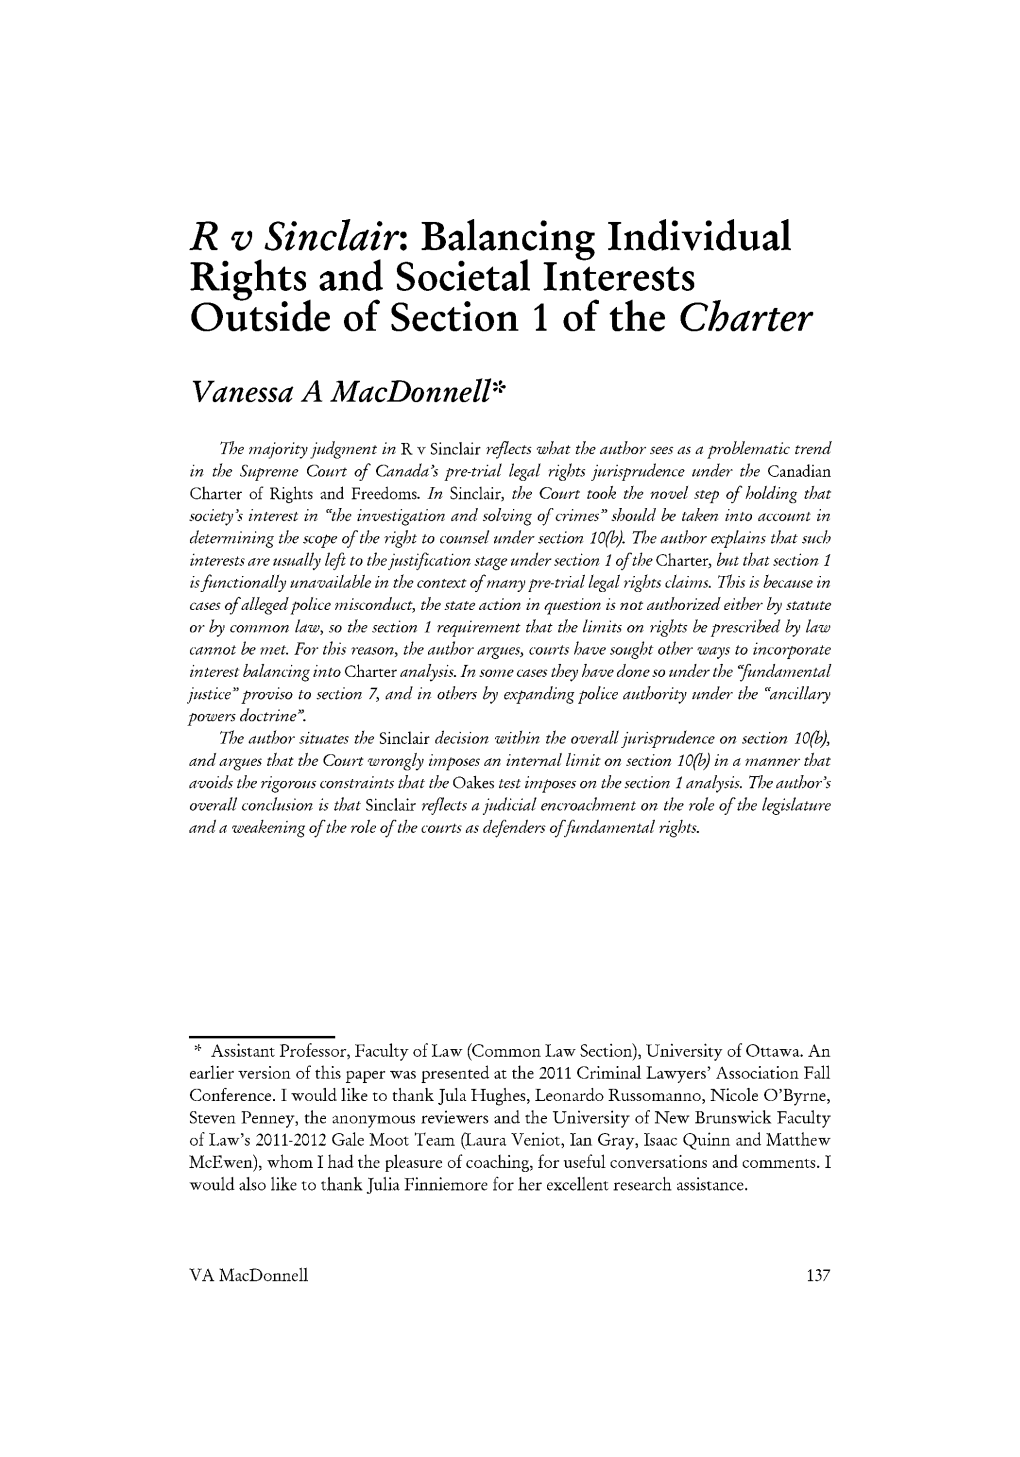 R V Sinclair: Balancing Individual Rights and Societal Interests Outside of Section 1 of the Charter